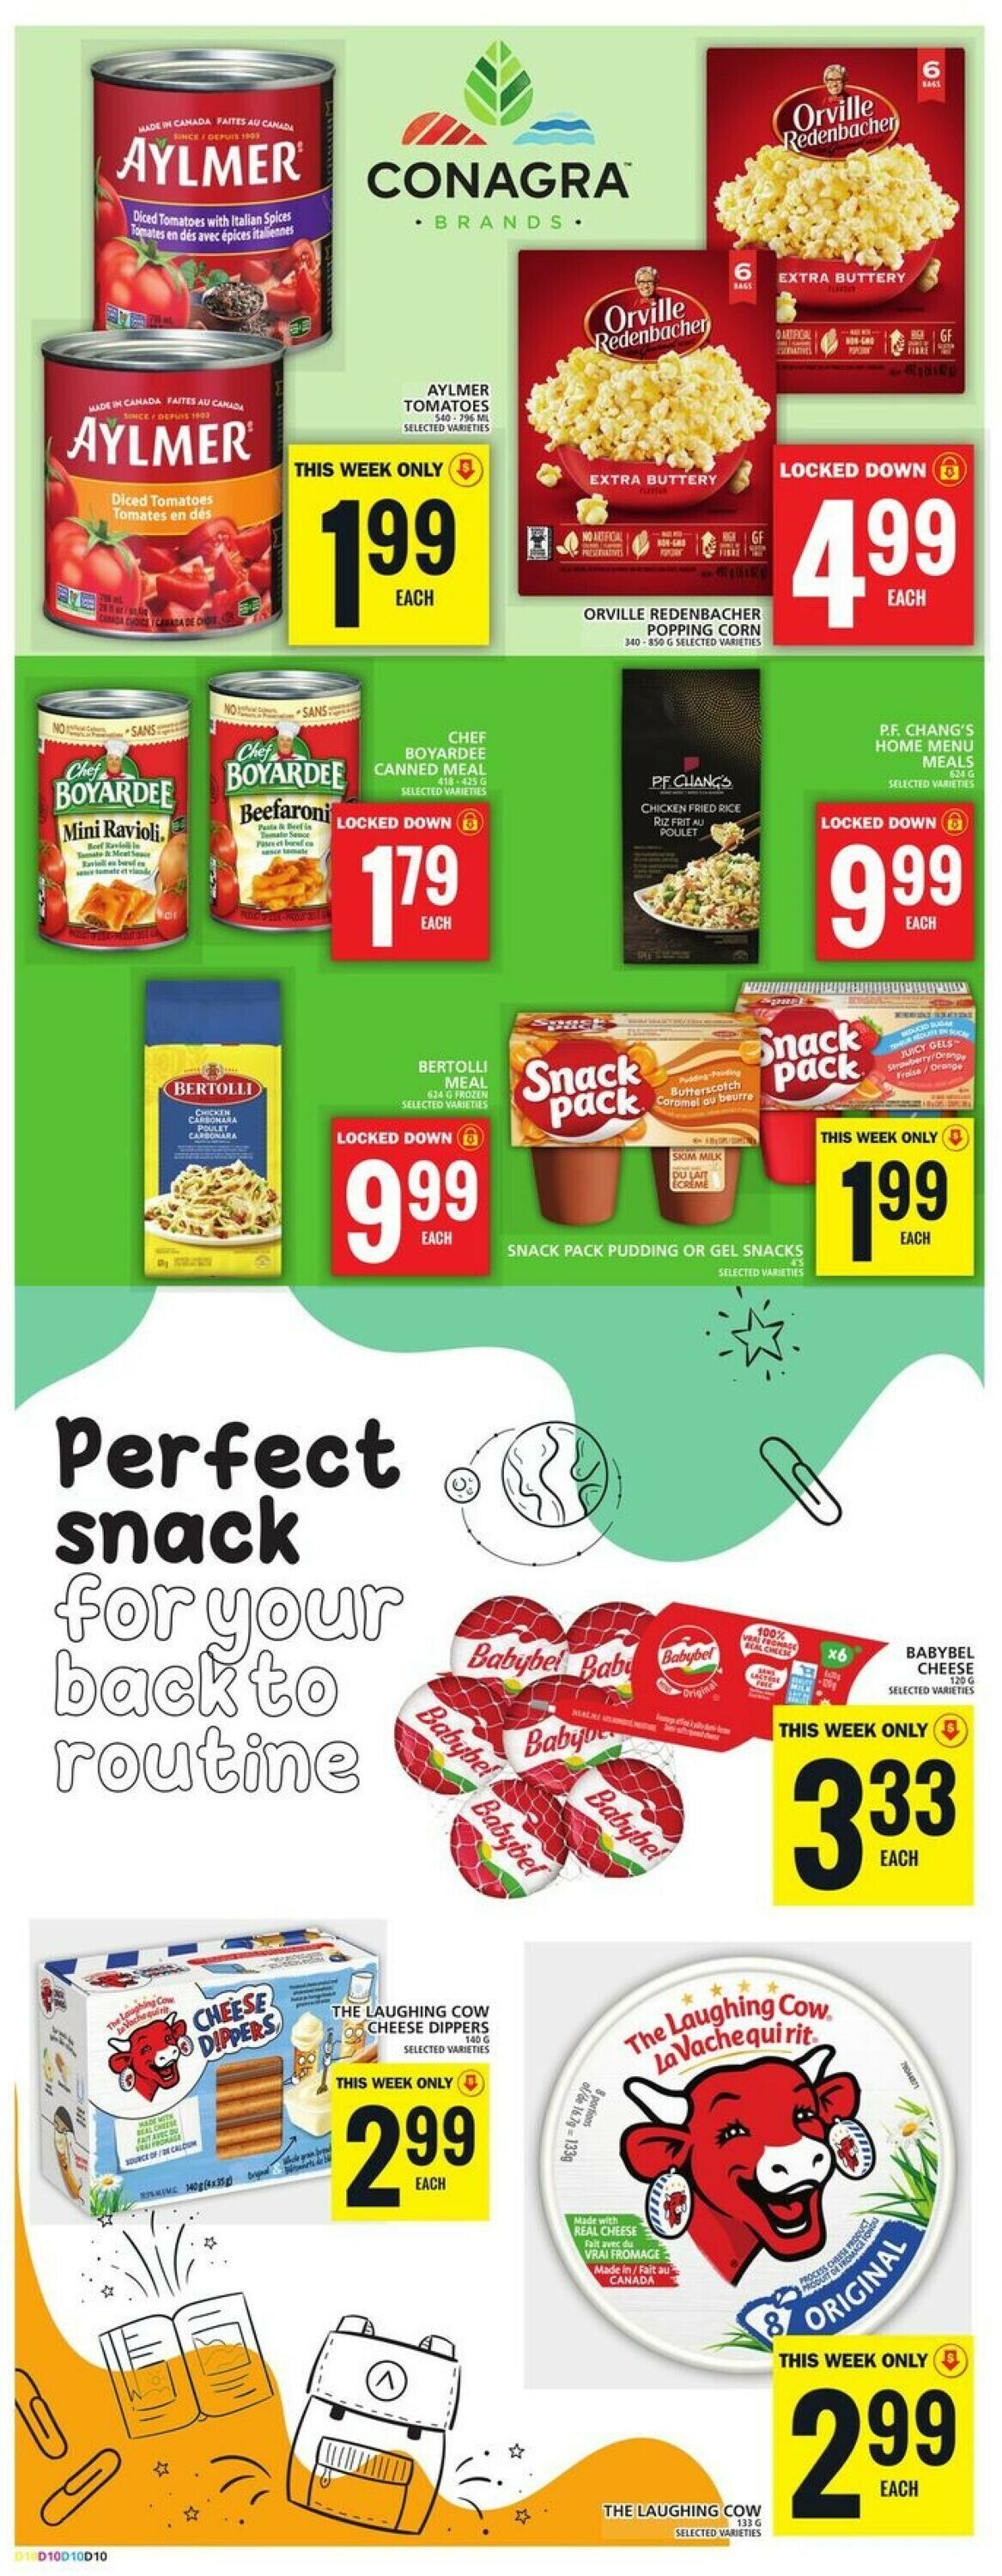 Food Basics Flyer from 01/04/2024